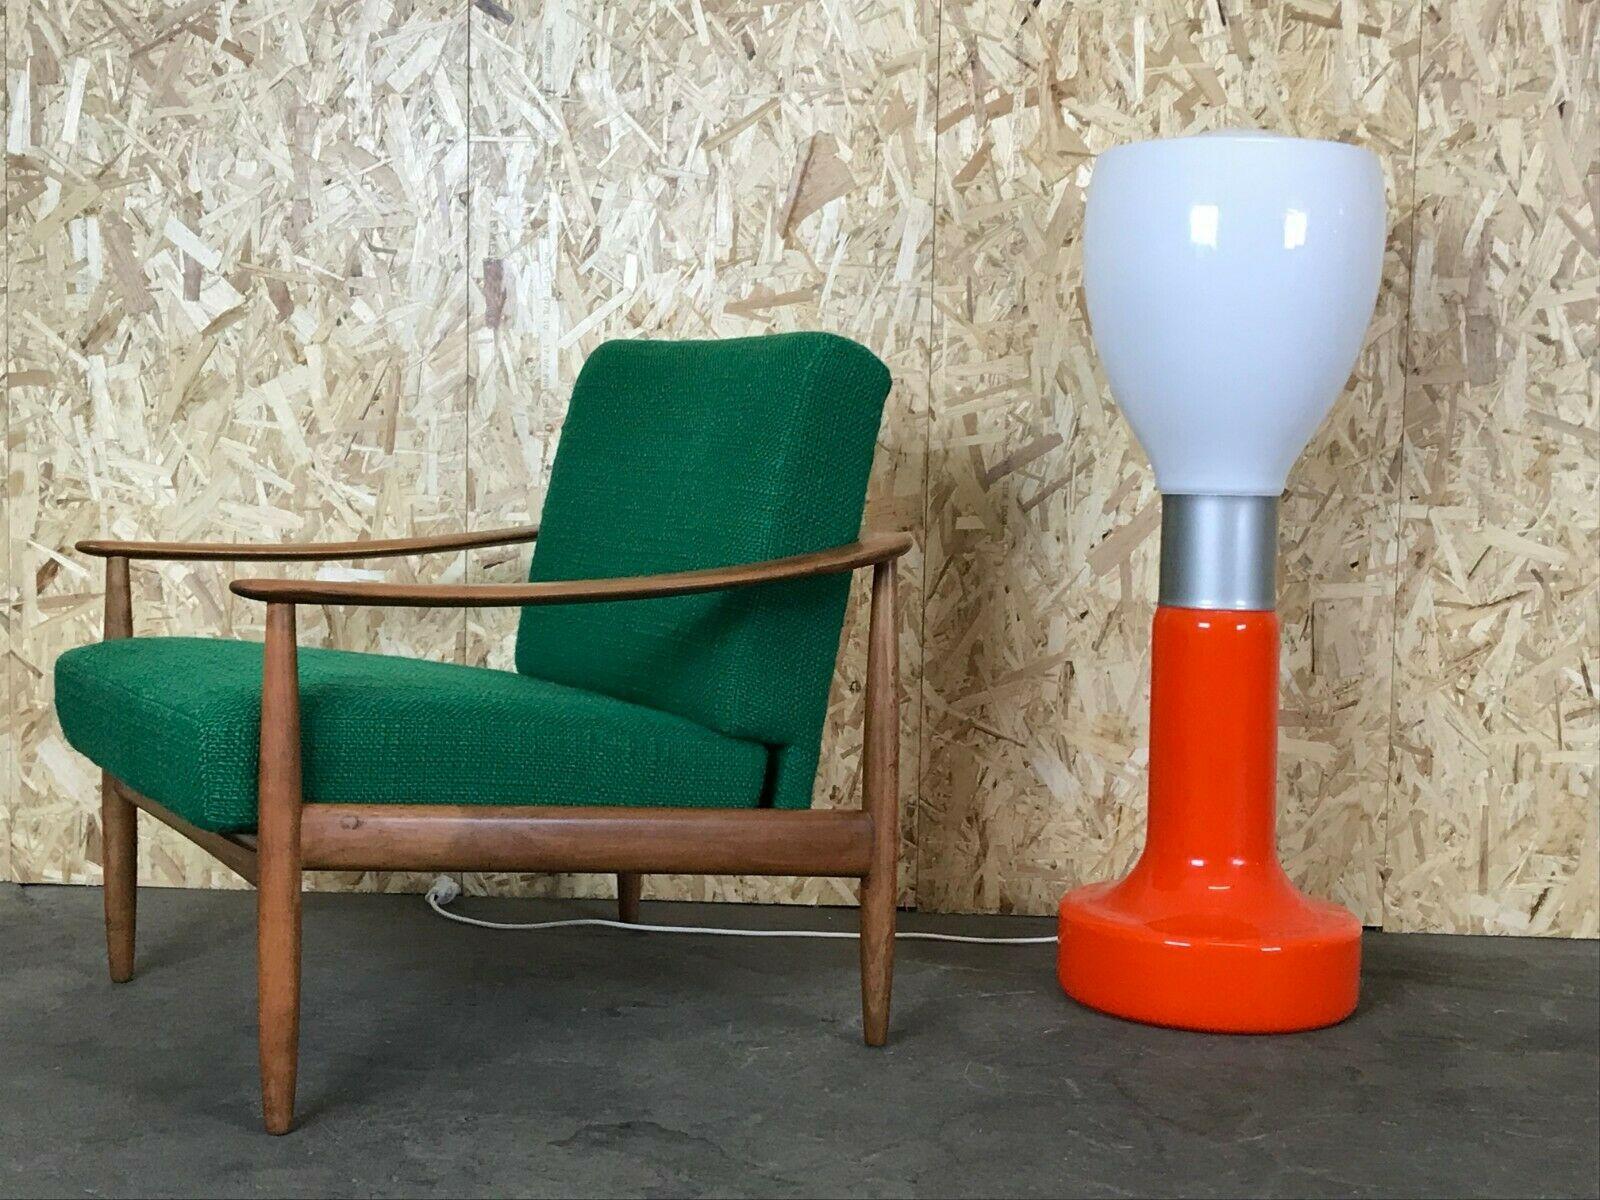 60s 70s lamp lamp birillo floor lamp by Carlo Nason for Mazzega 60s

Object: floor lamp

Manufacturer: Mazzega

Condition: good

Age: around 1960-1970

Dimensions:

Diameter = 35cm
Height = 102cm

Other notes:

The pictures serve as